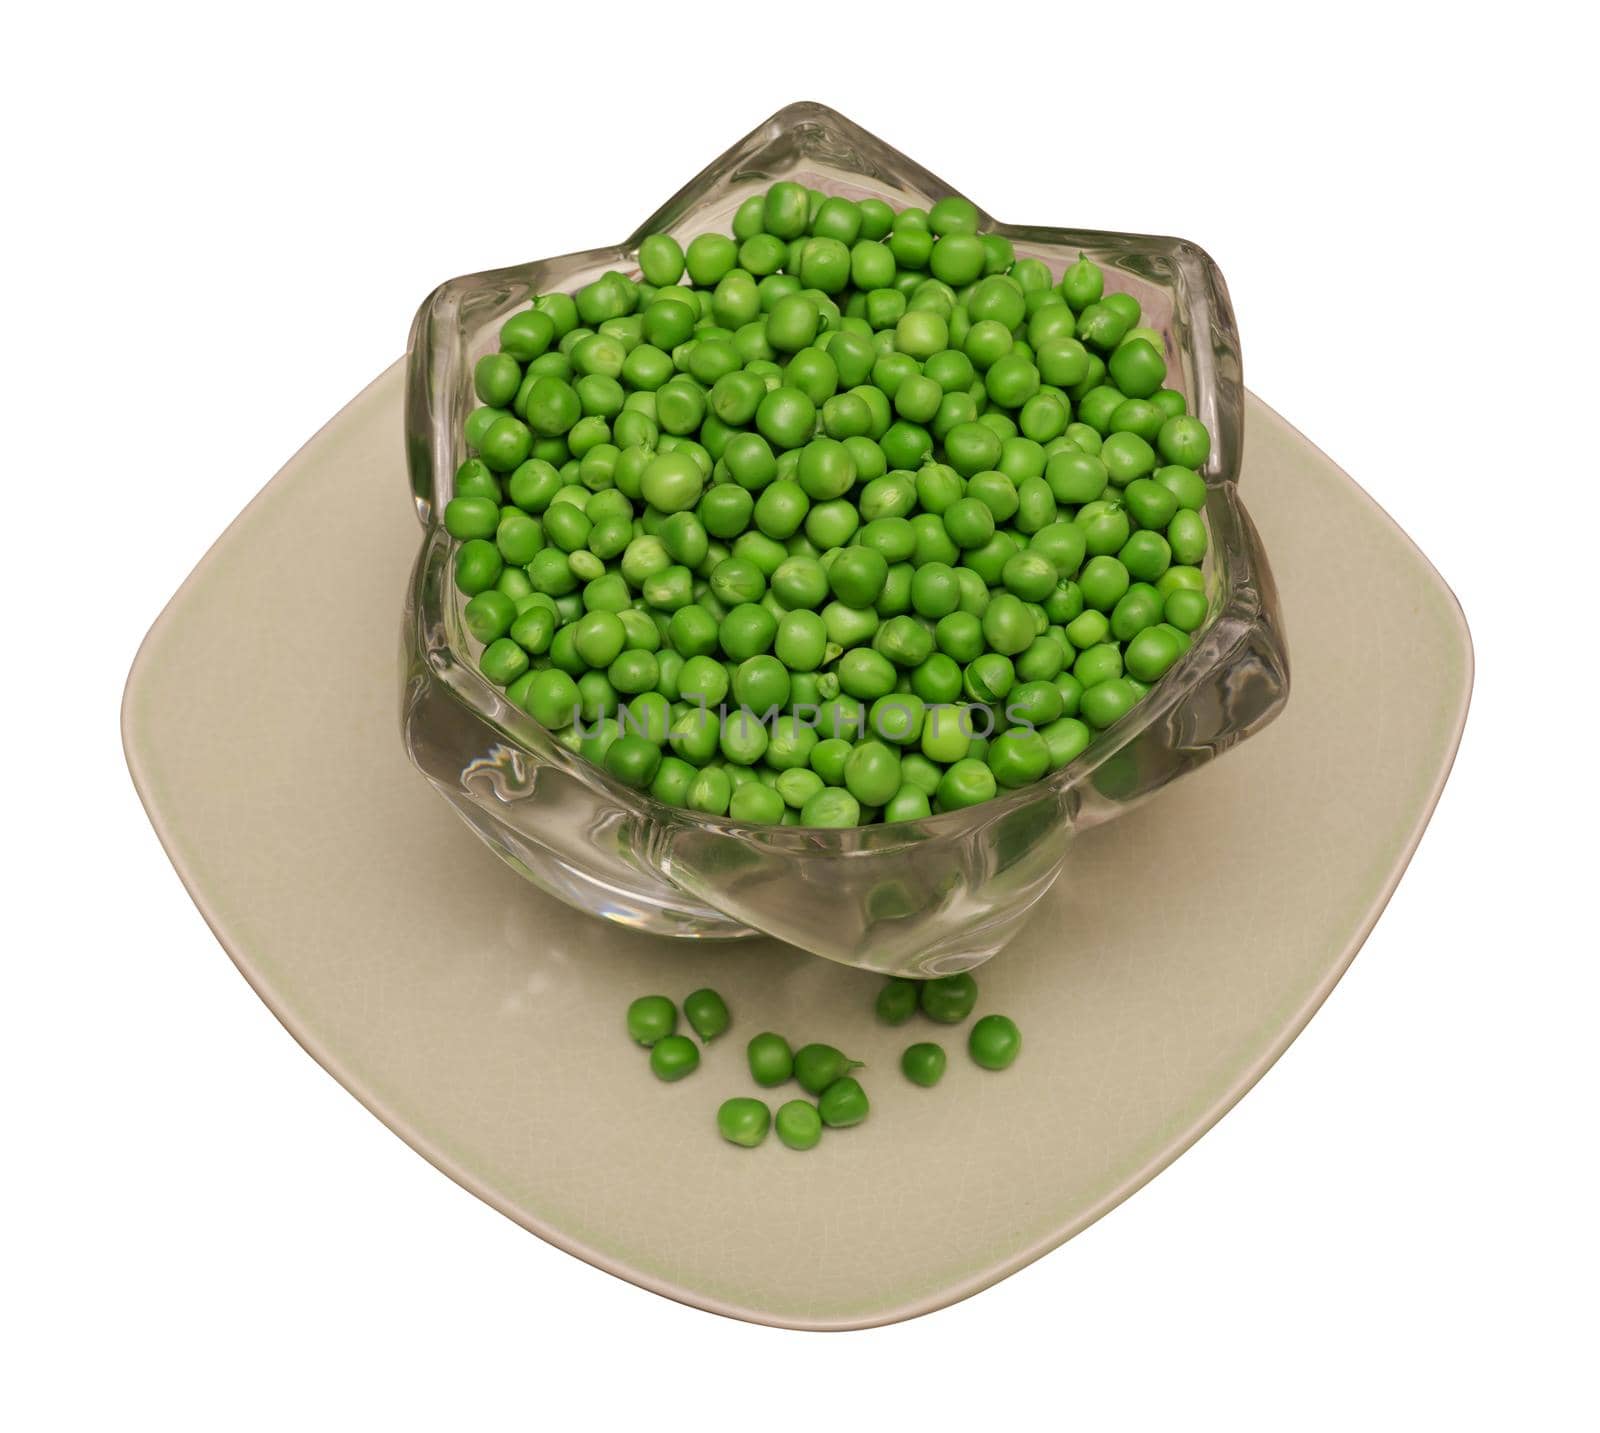 green peas separated from the shell, pea seeds, lies in glassware and on a square plate, on a white background